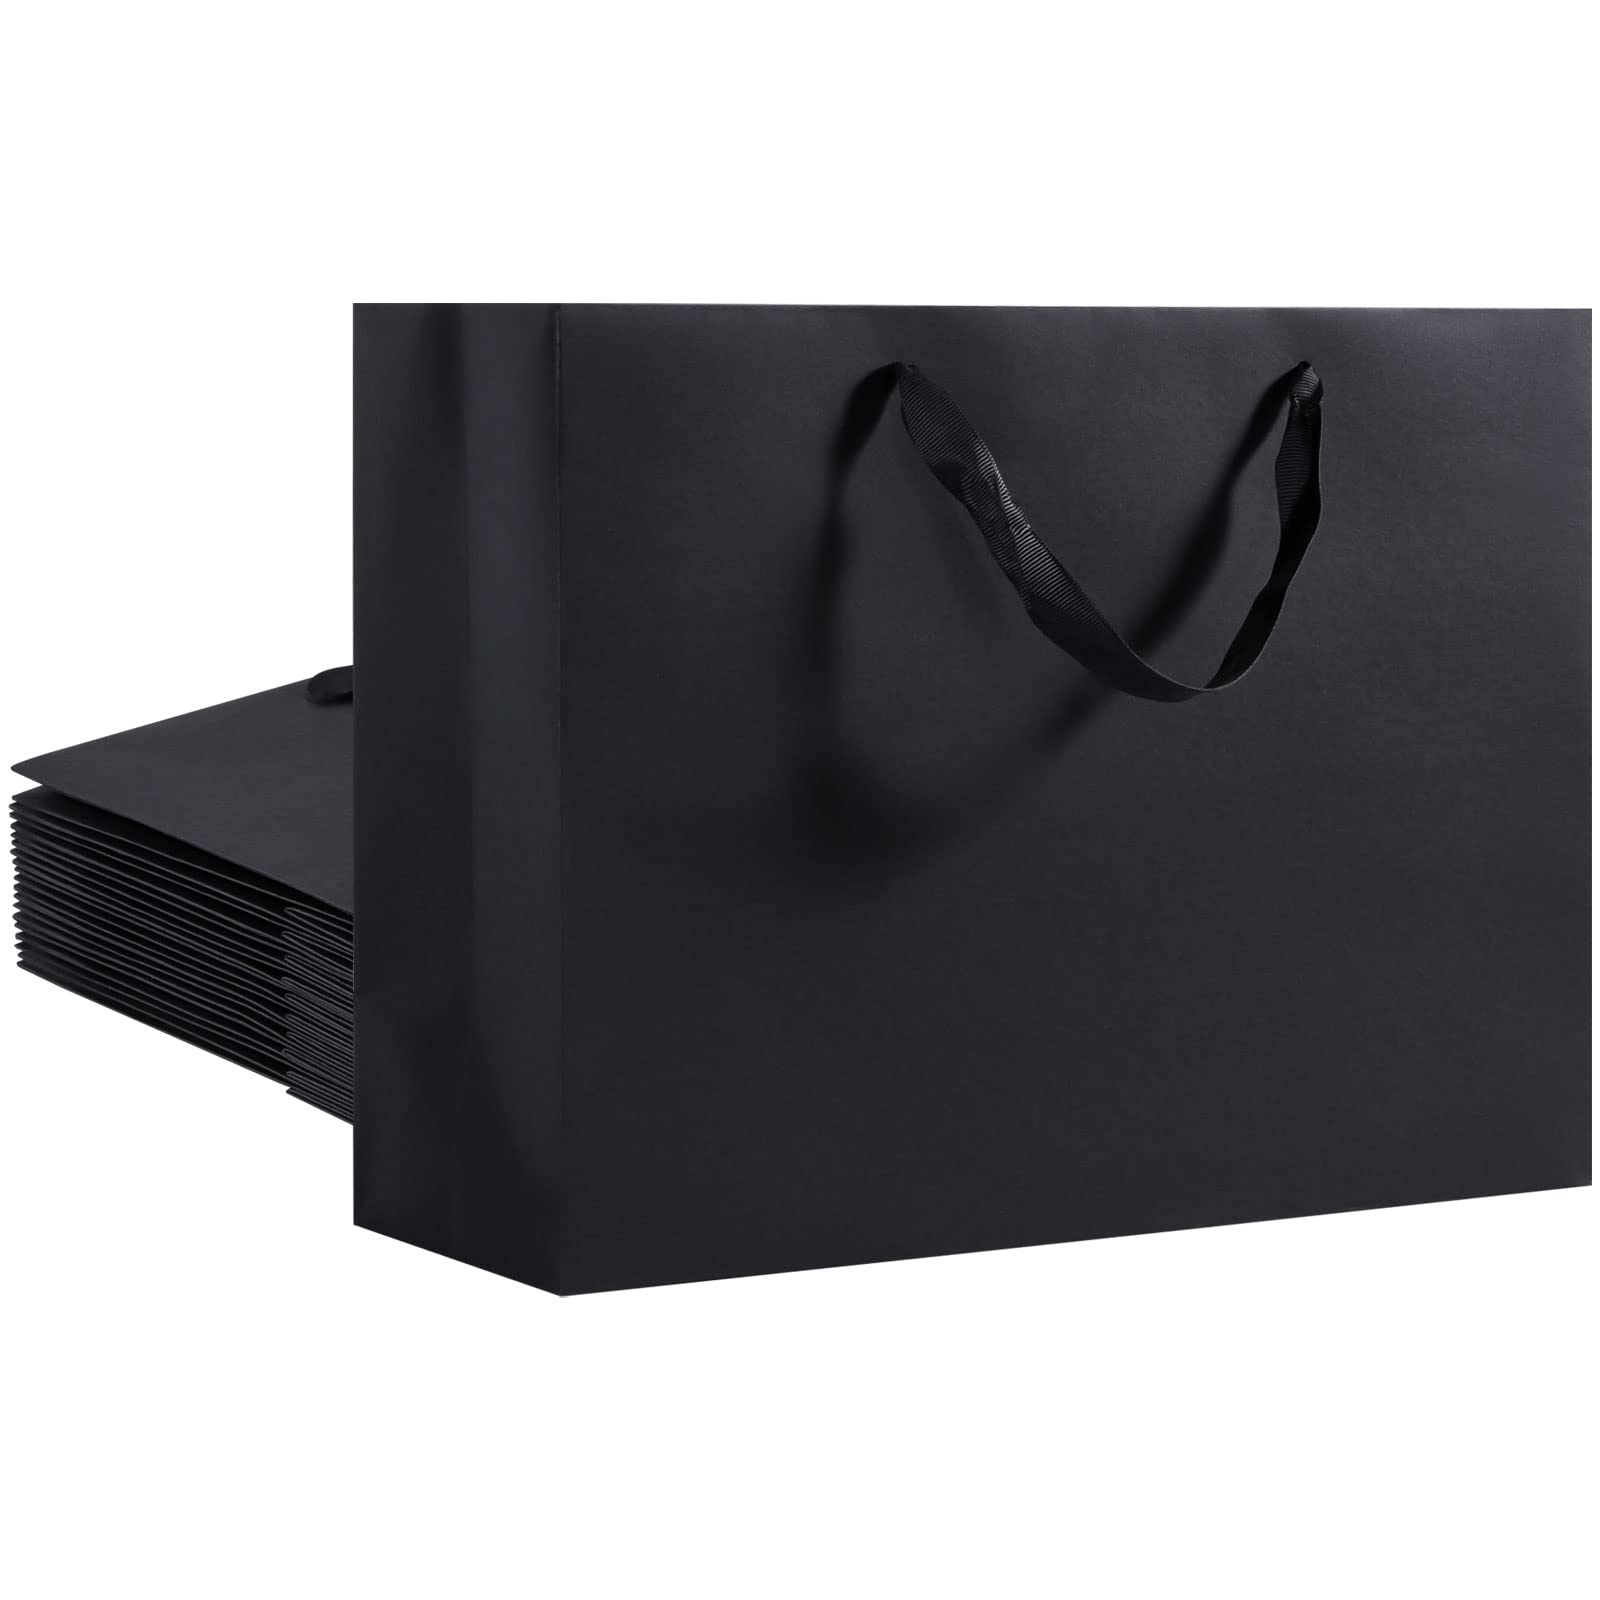 Umoonfine Gift Wrap Bag, 12 Pack Extra Large Black Paper Bags with Ribbon Handles, 15.7x5.9x12 Inches, Reusable for Shopping, Wedding, Party